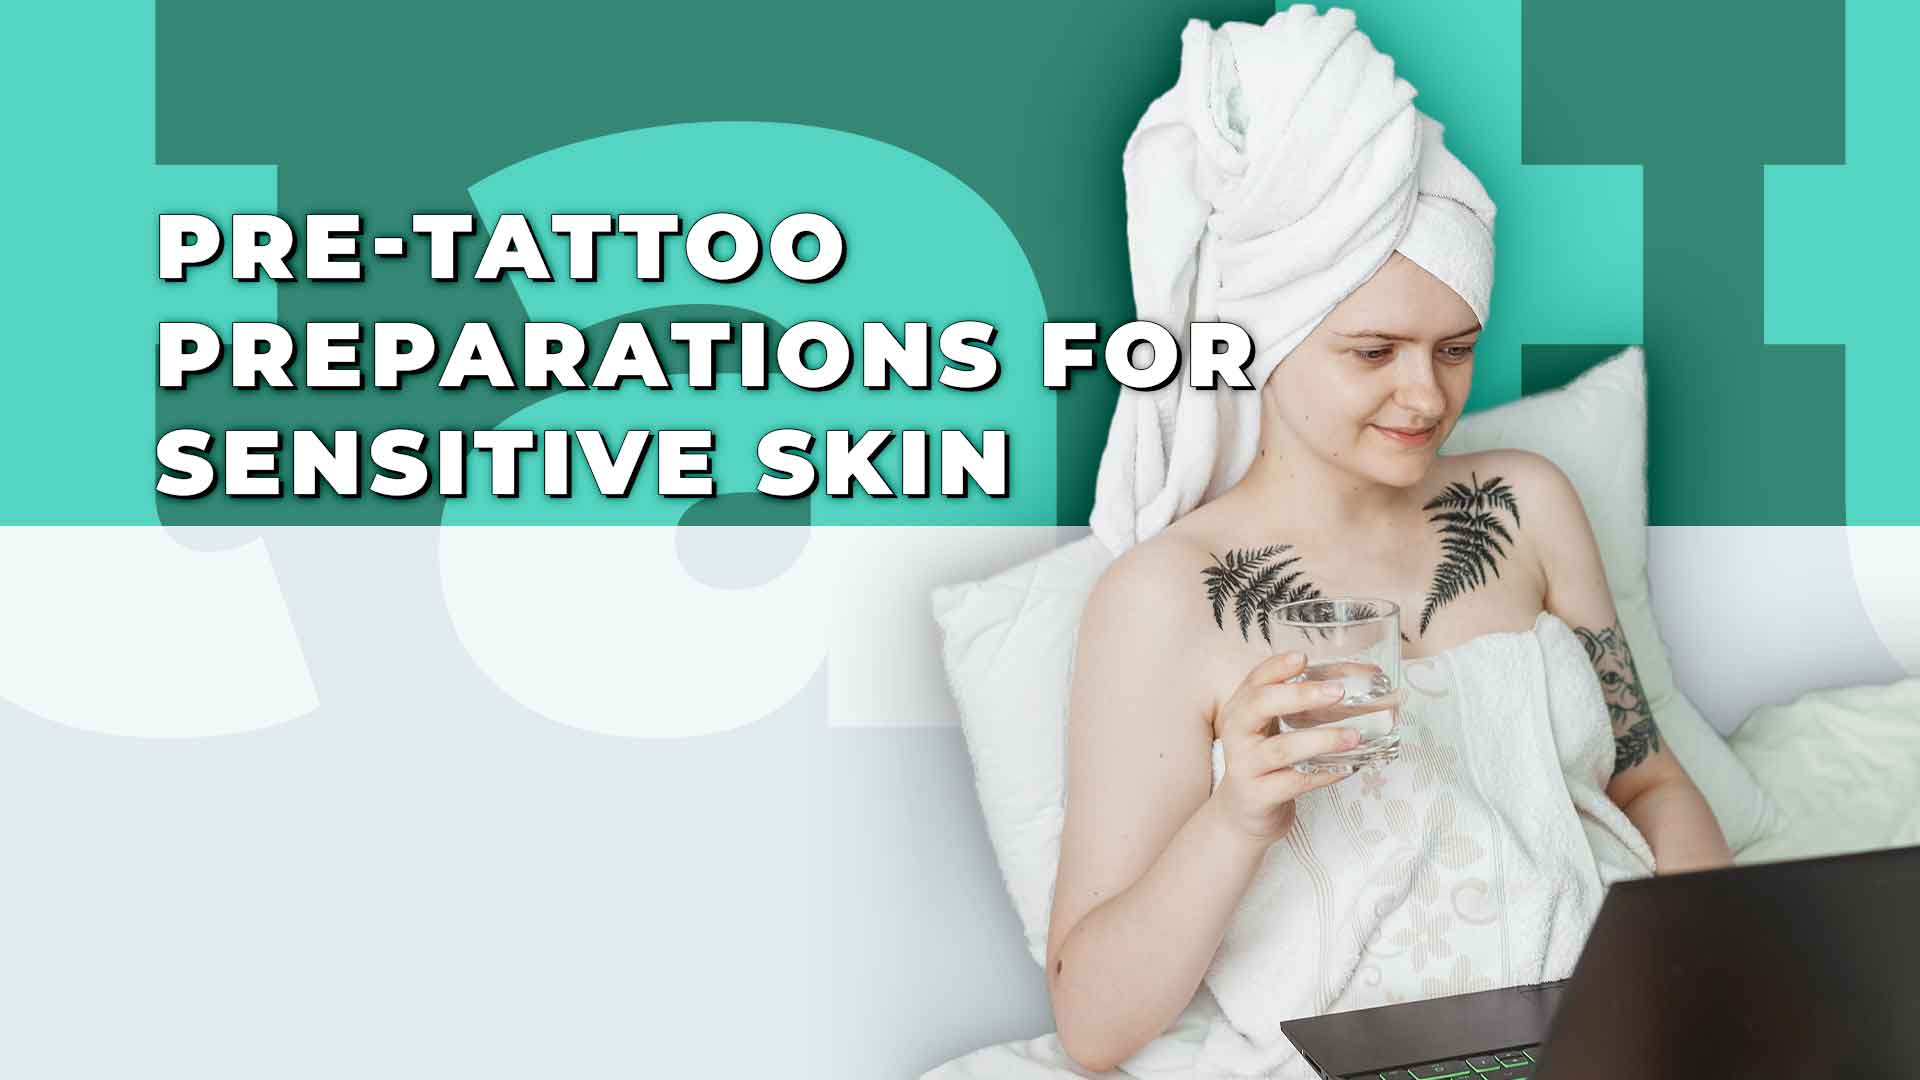 How Should You Prepare for a Long Tattoo Session? – Best Tattoo Shop In NYC  | New York City Rooftop | Inknation Studio